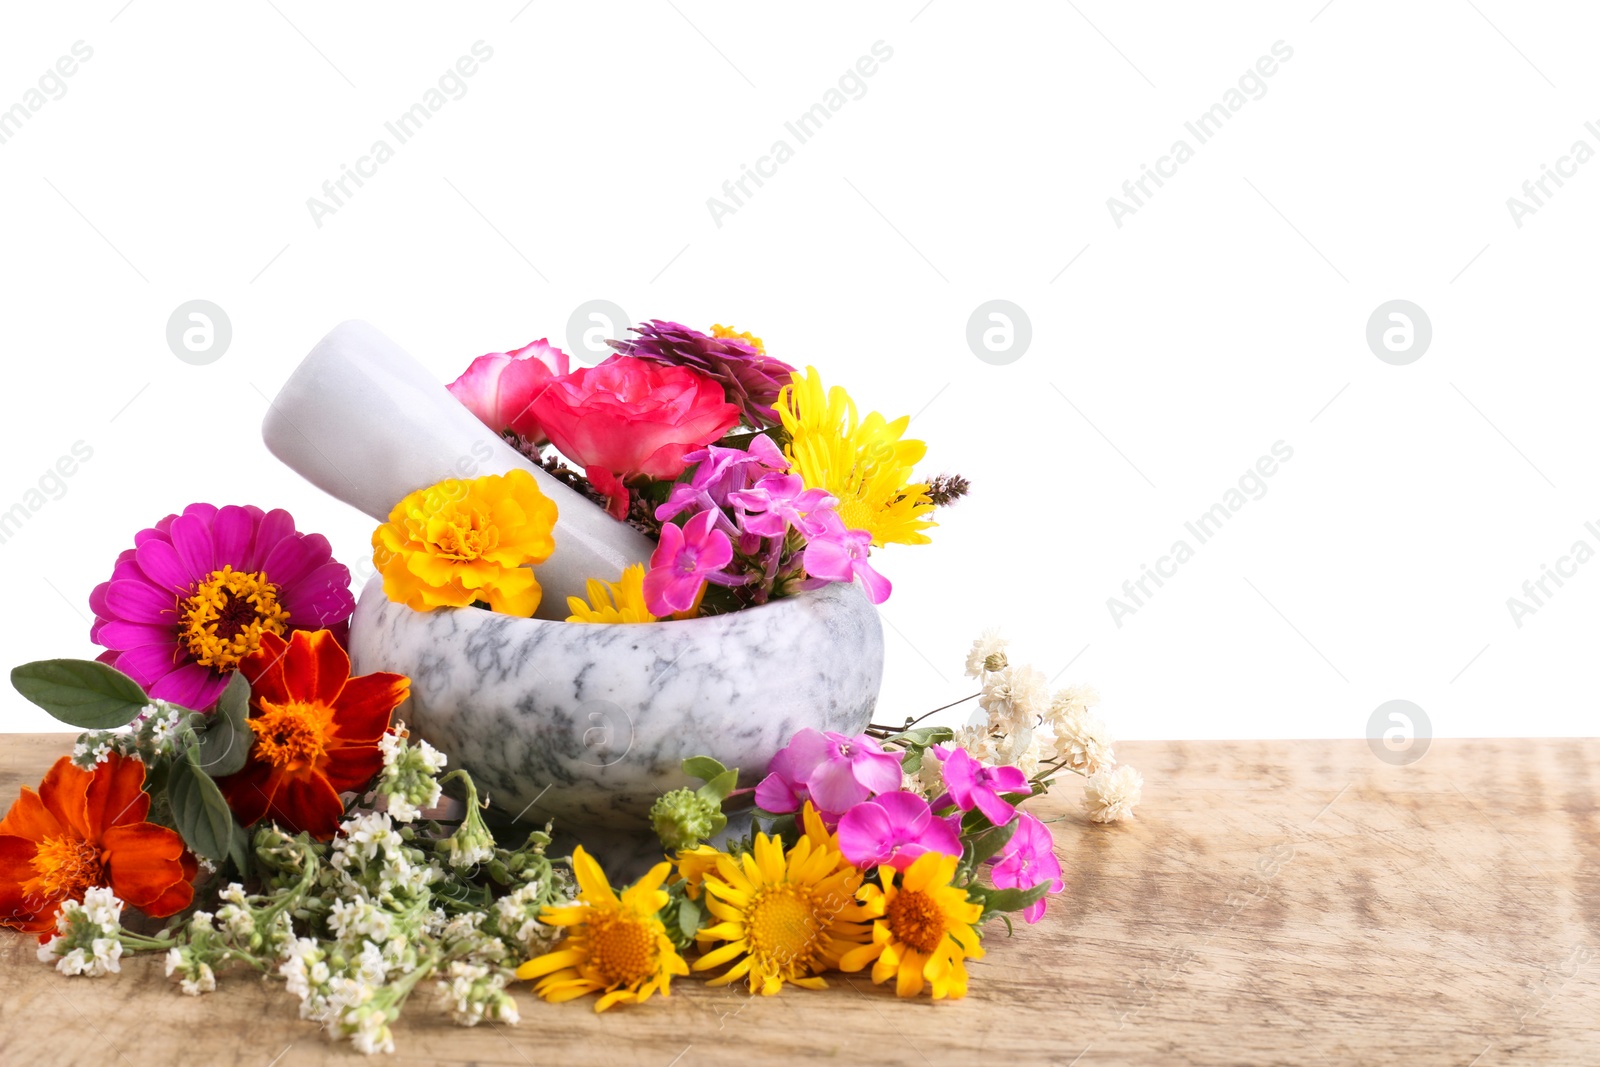 Photo of Marble mortar, pestle and different flowers on wooden table against white background. Space for text